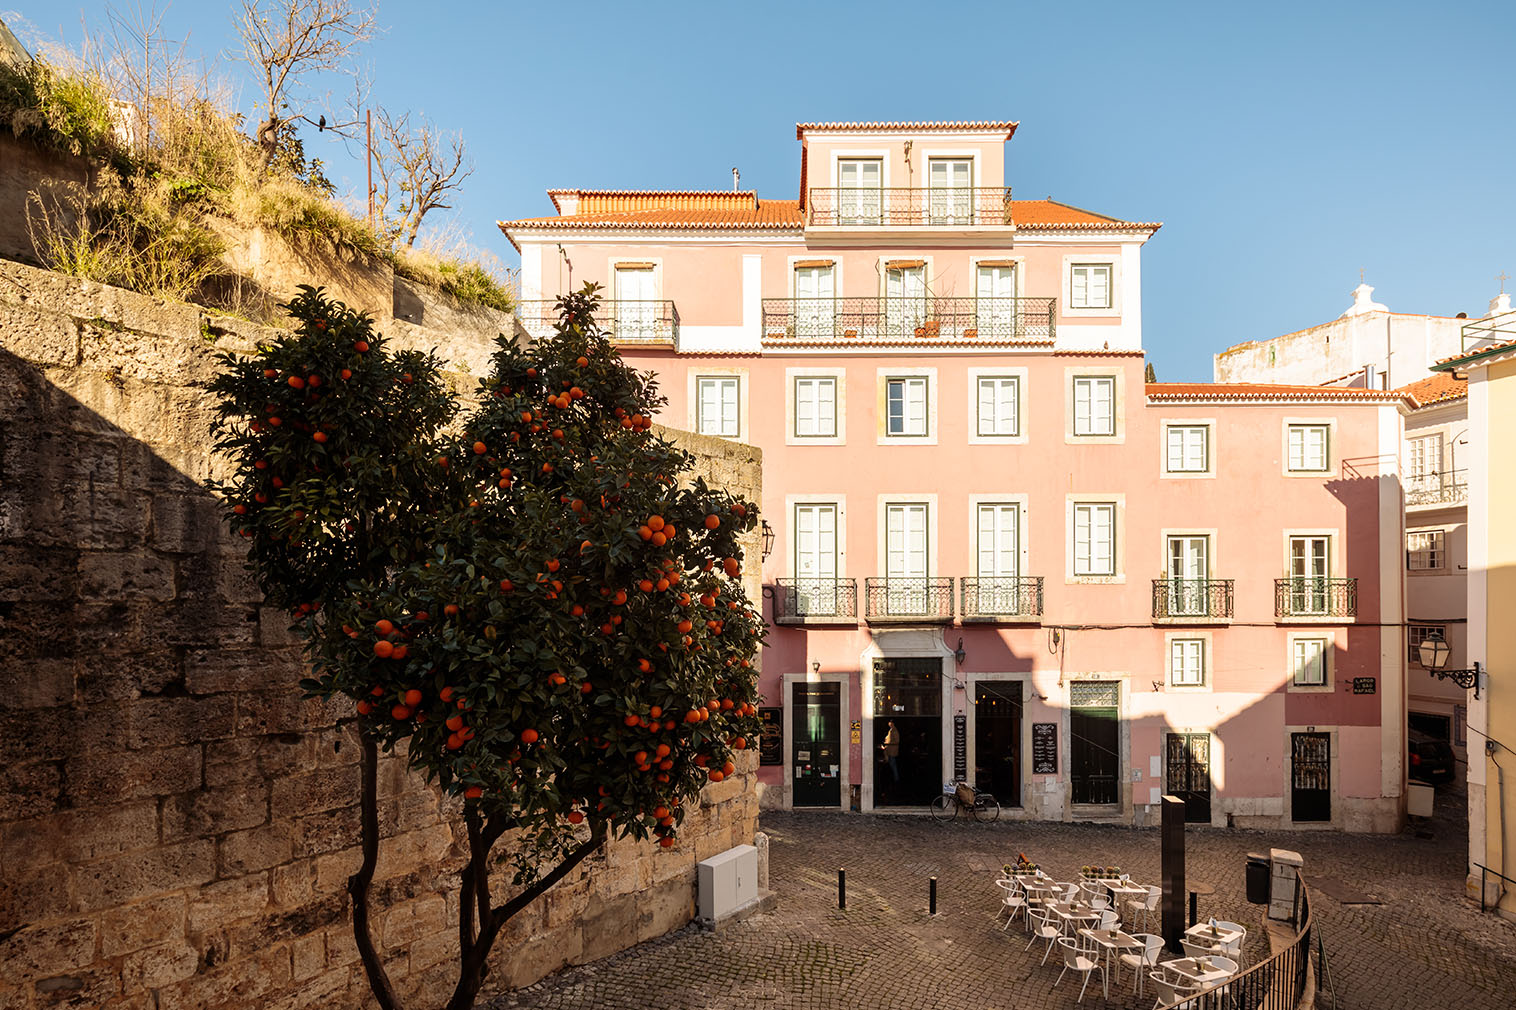 5 of our favourite Lisbon properties on the market right now: an Amalfa loft that blends old and new